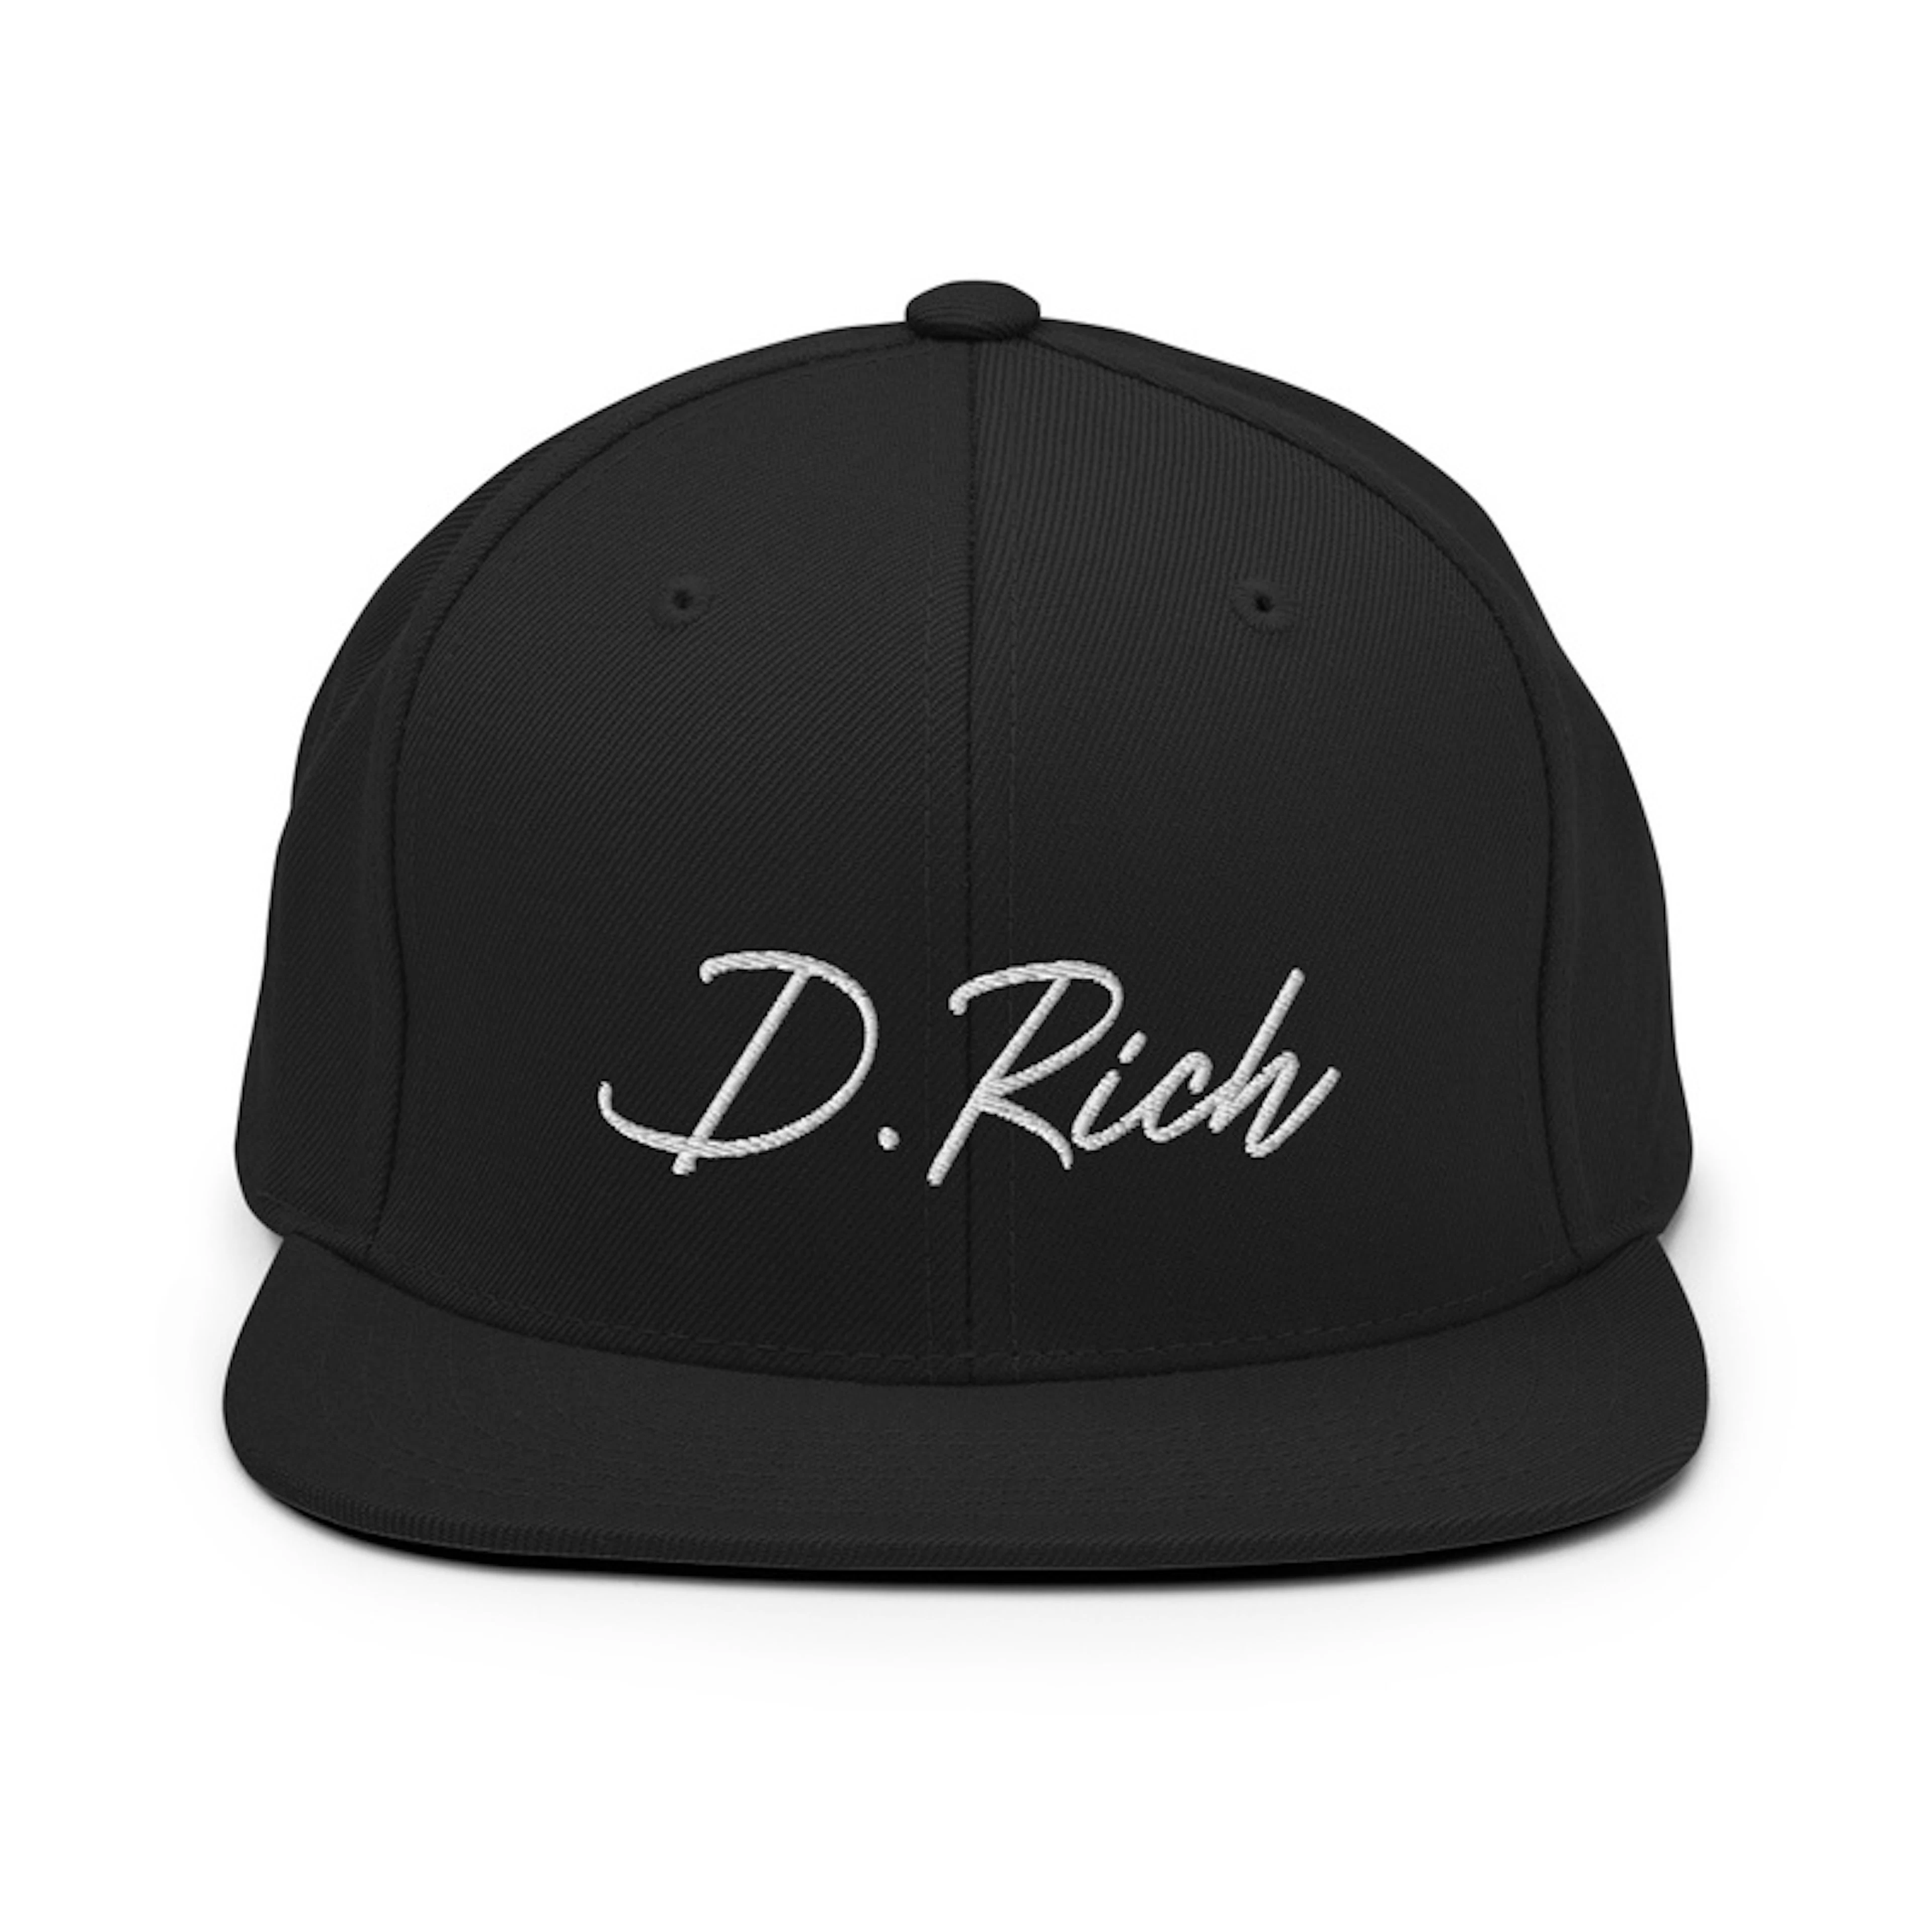 D. Rich logo embroidered snapback hat